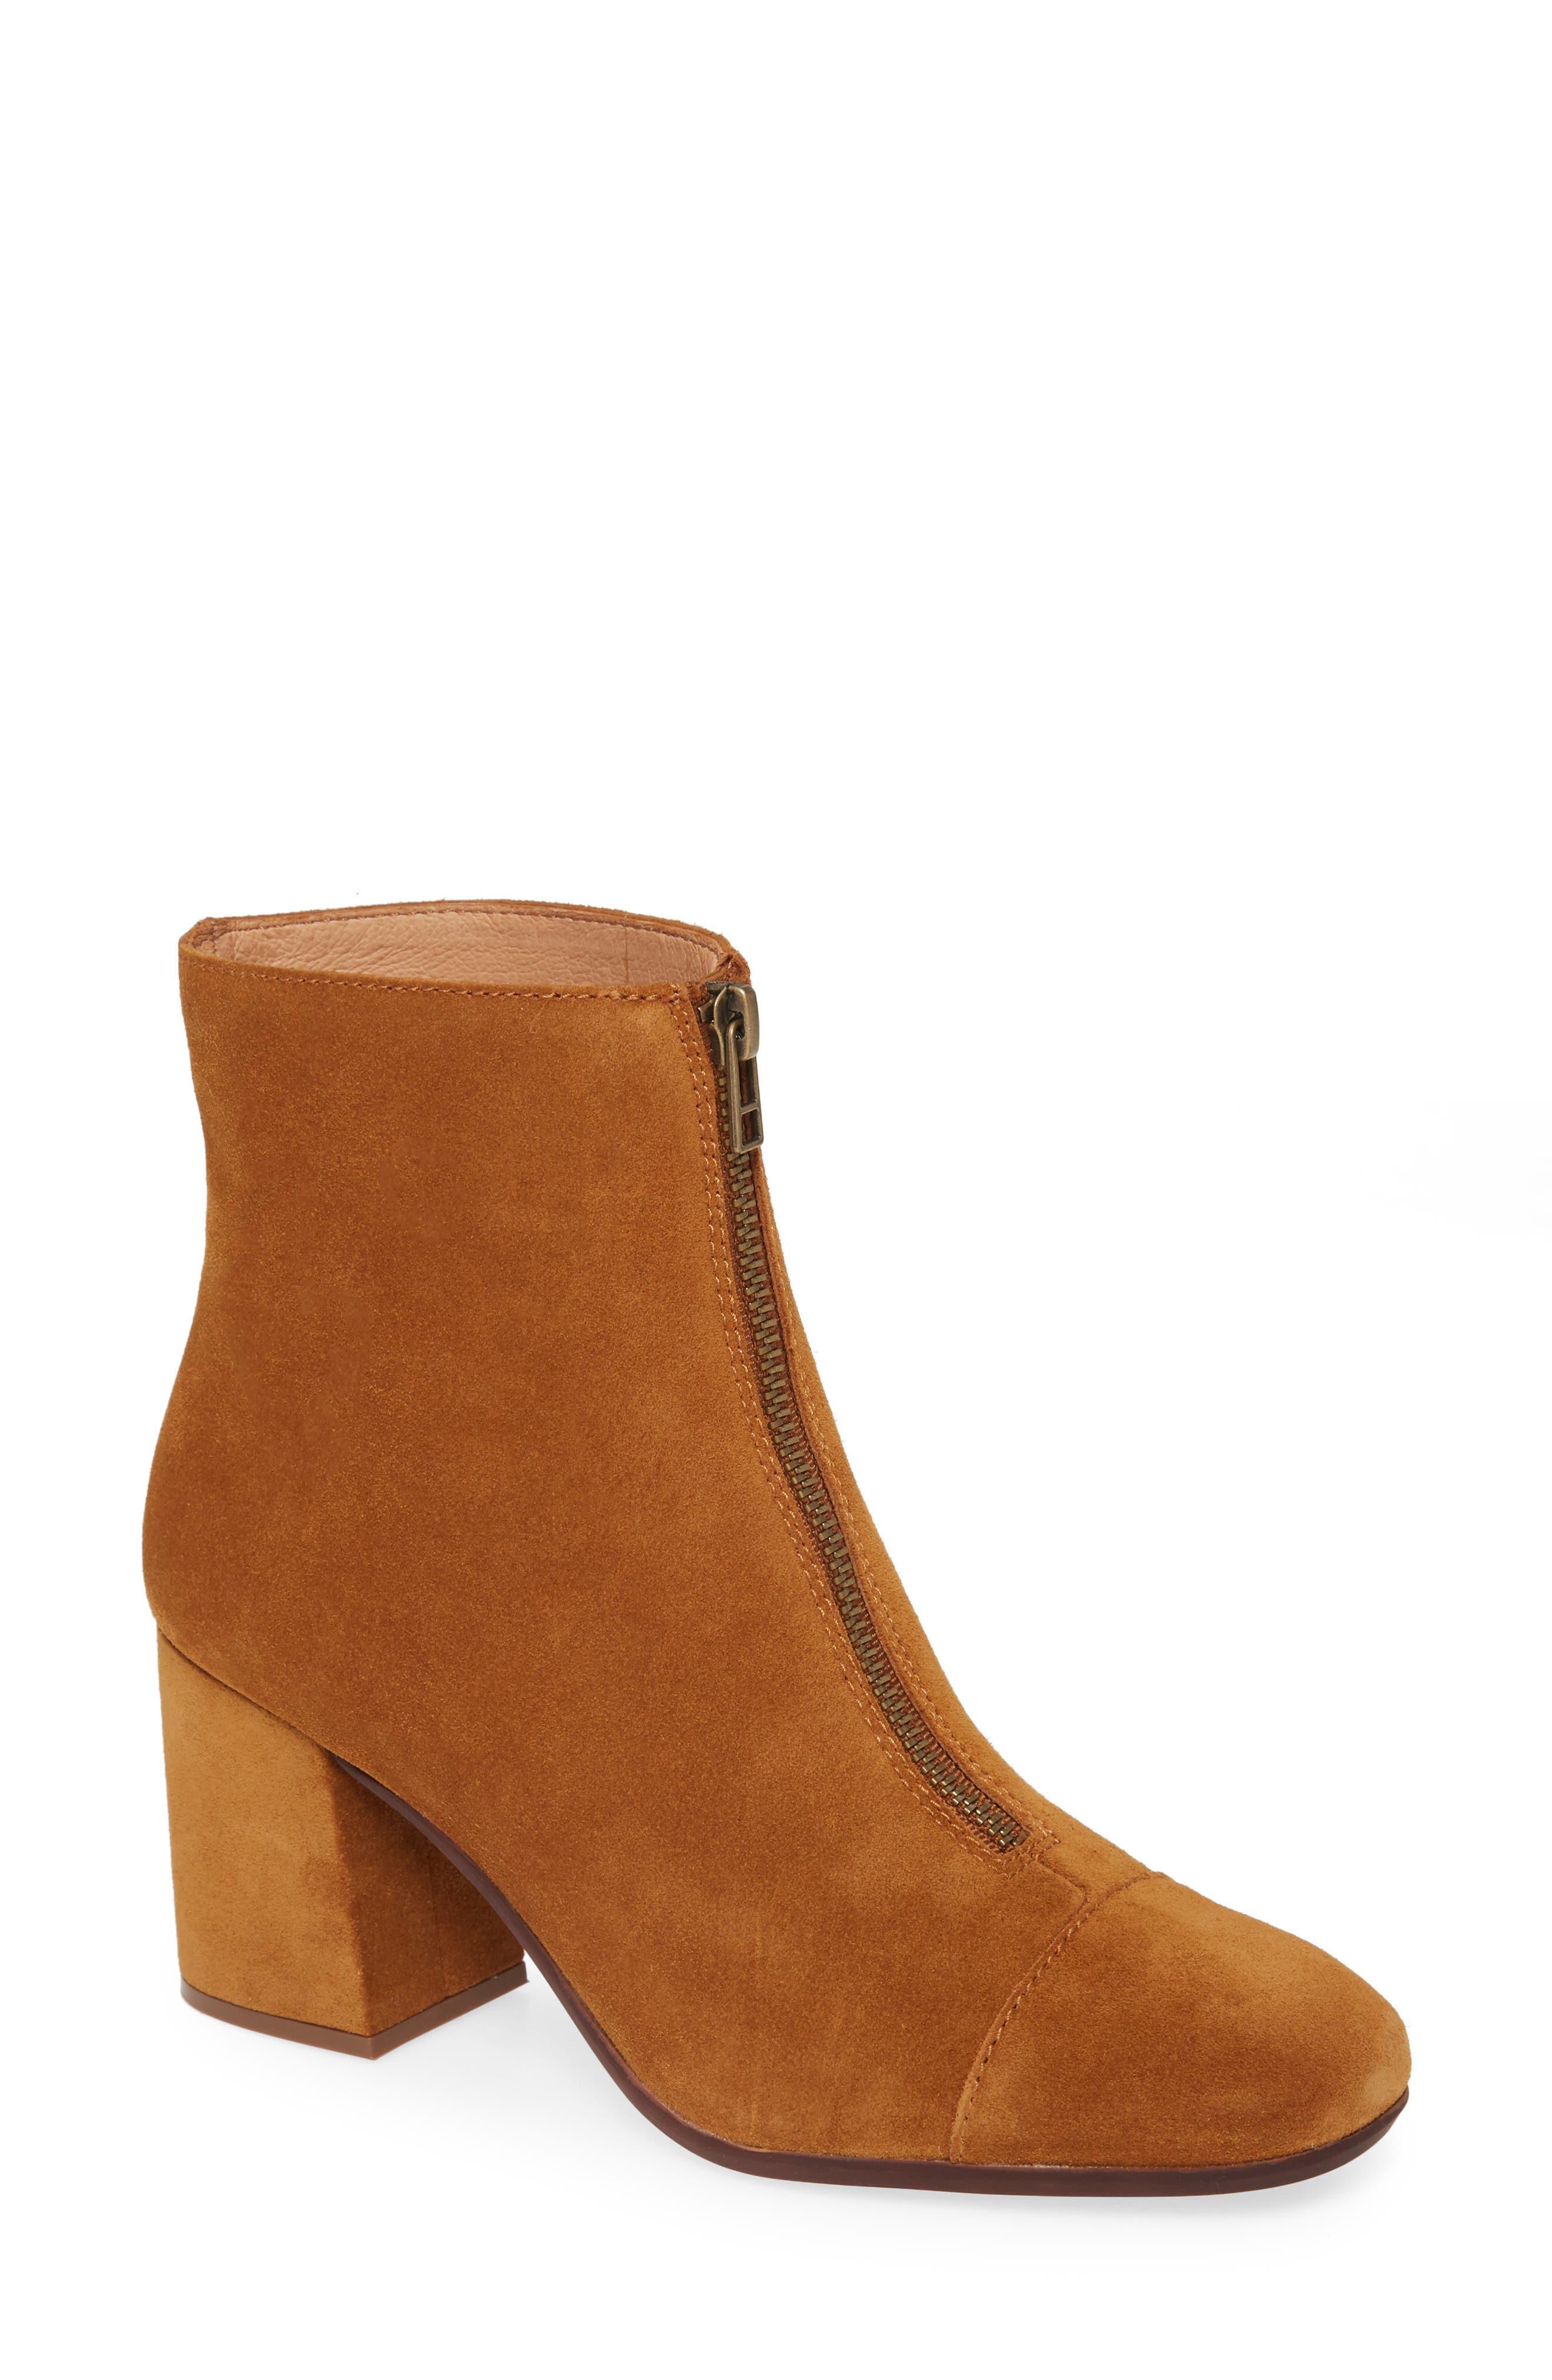 madewell suede boots